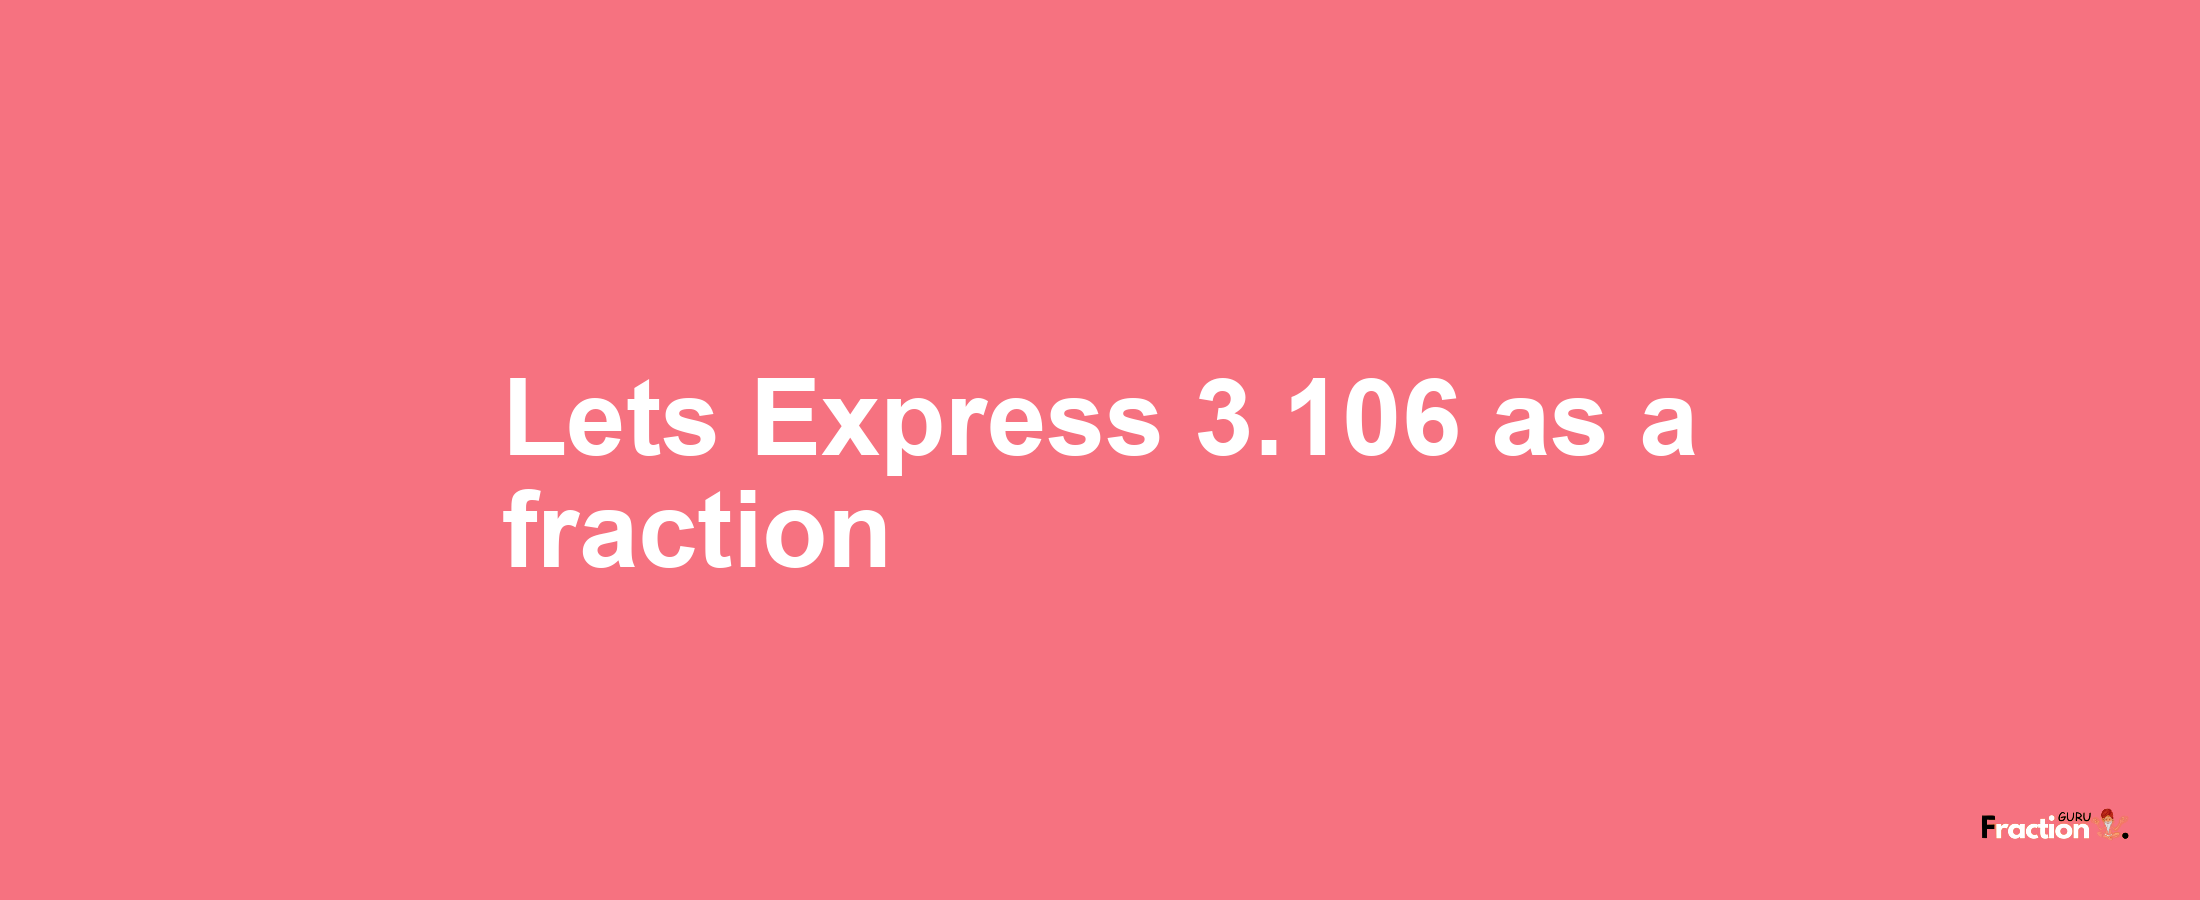 Lets Express 3.106 as afraction